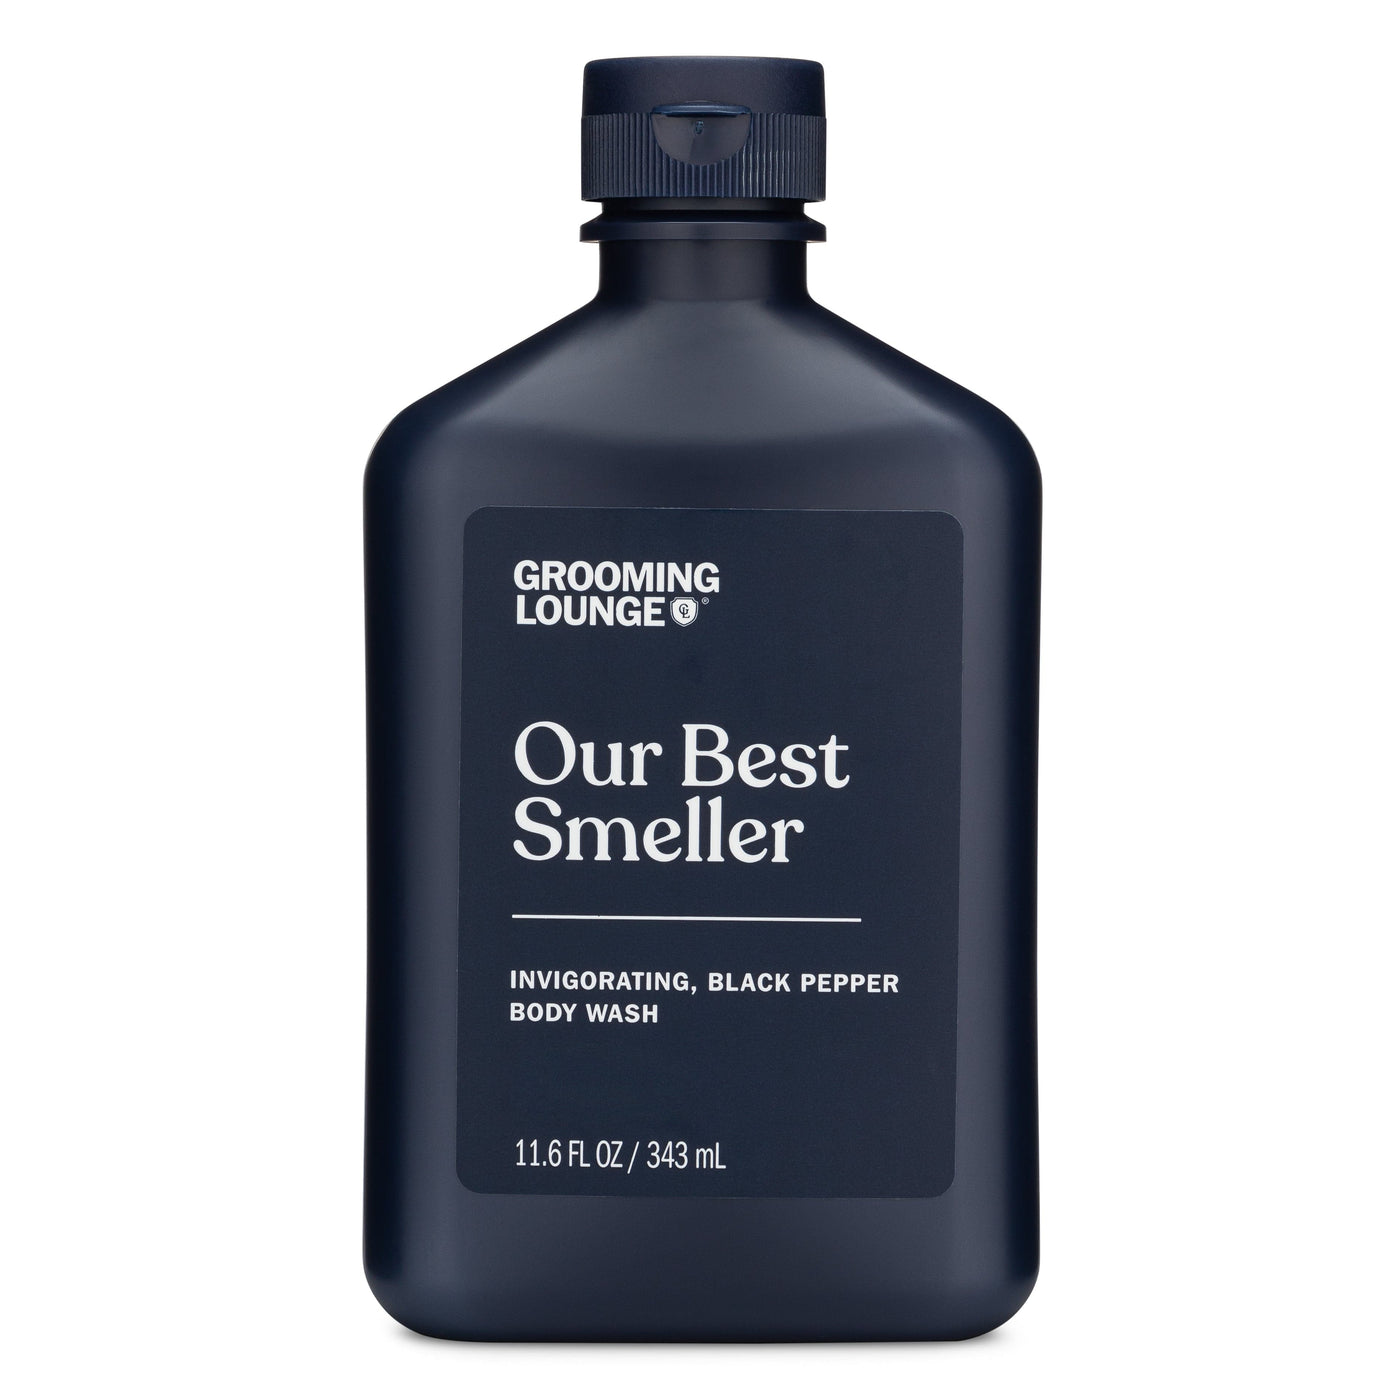 Grooming Lounge Our Best Smeller Body Wash by Grooming Lounge